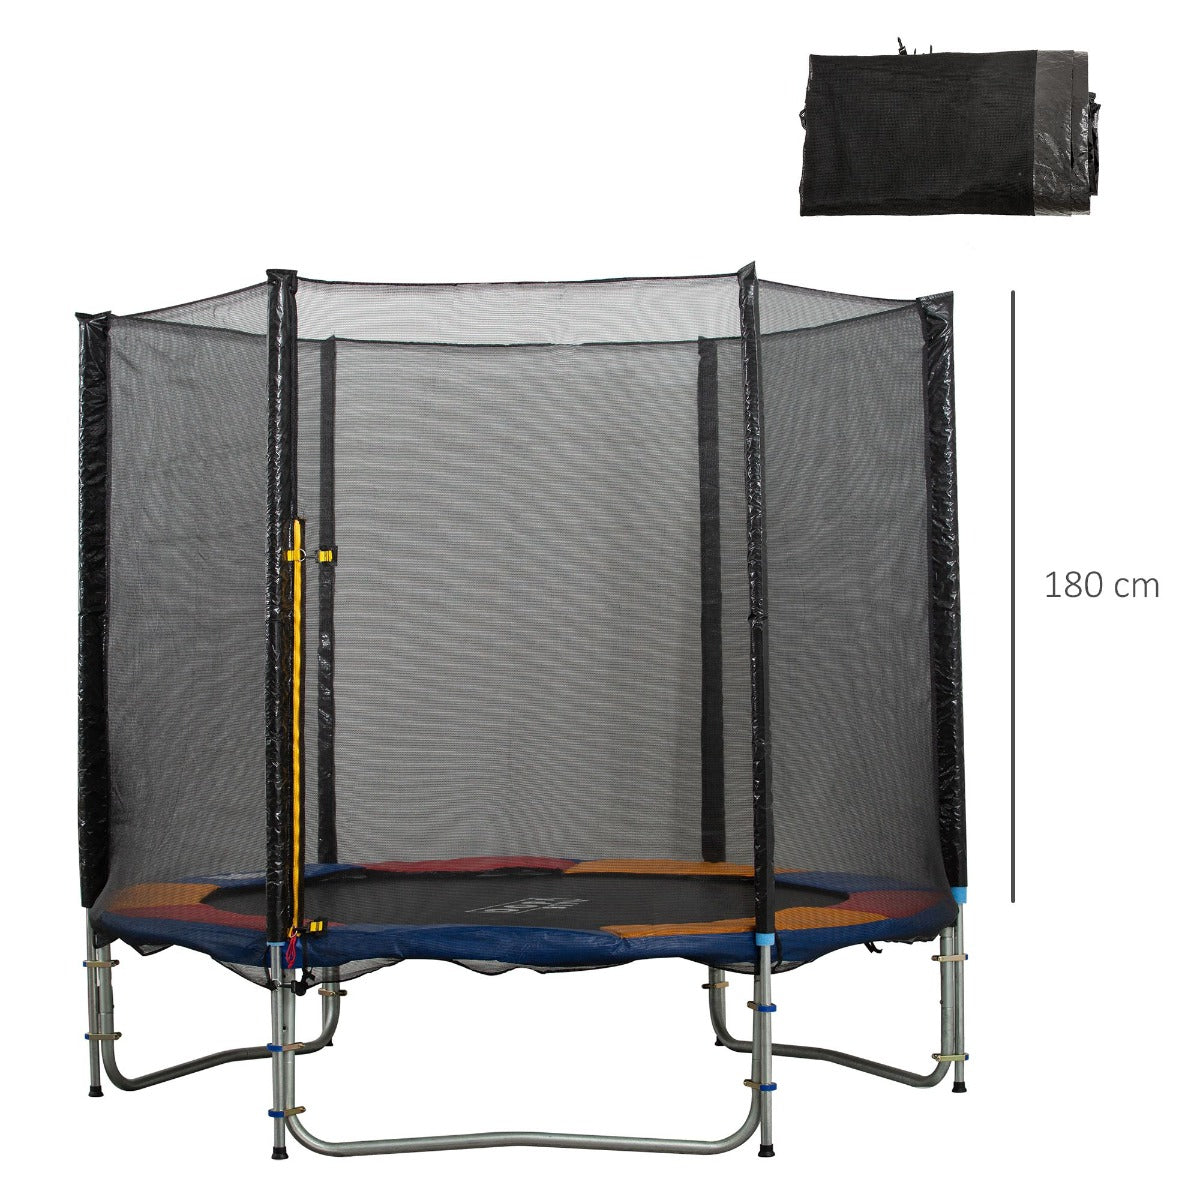 HOMCOM 10ft Replacement Safety Trampoline Net with Enclosure - Inspirely